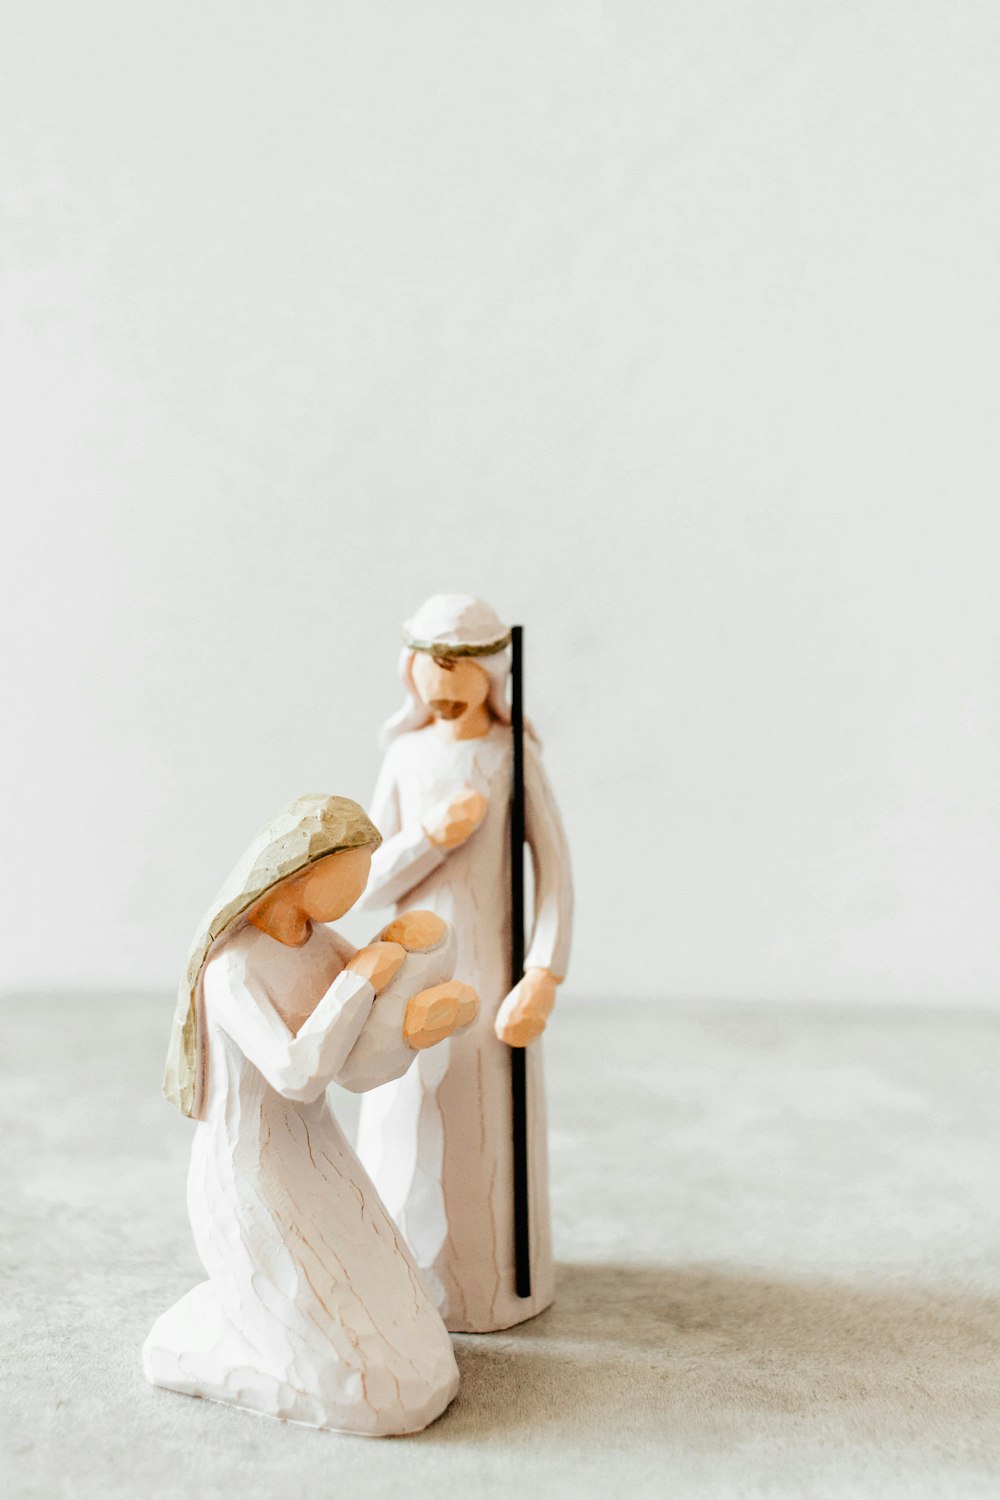 a figurine of a man holding a woman